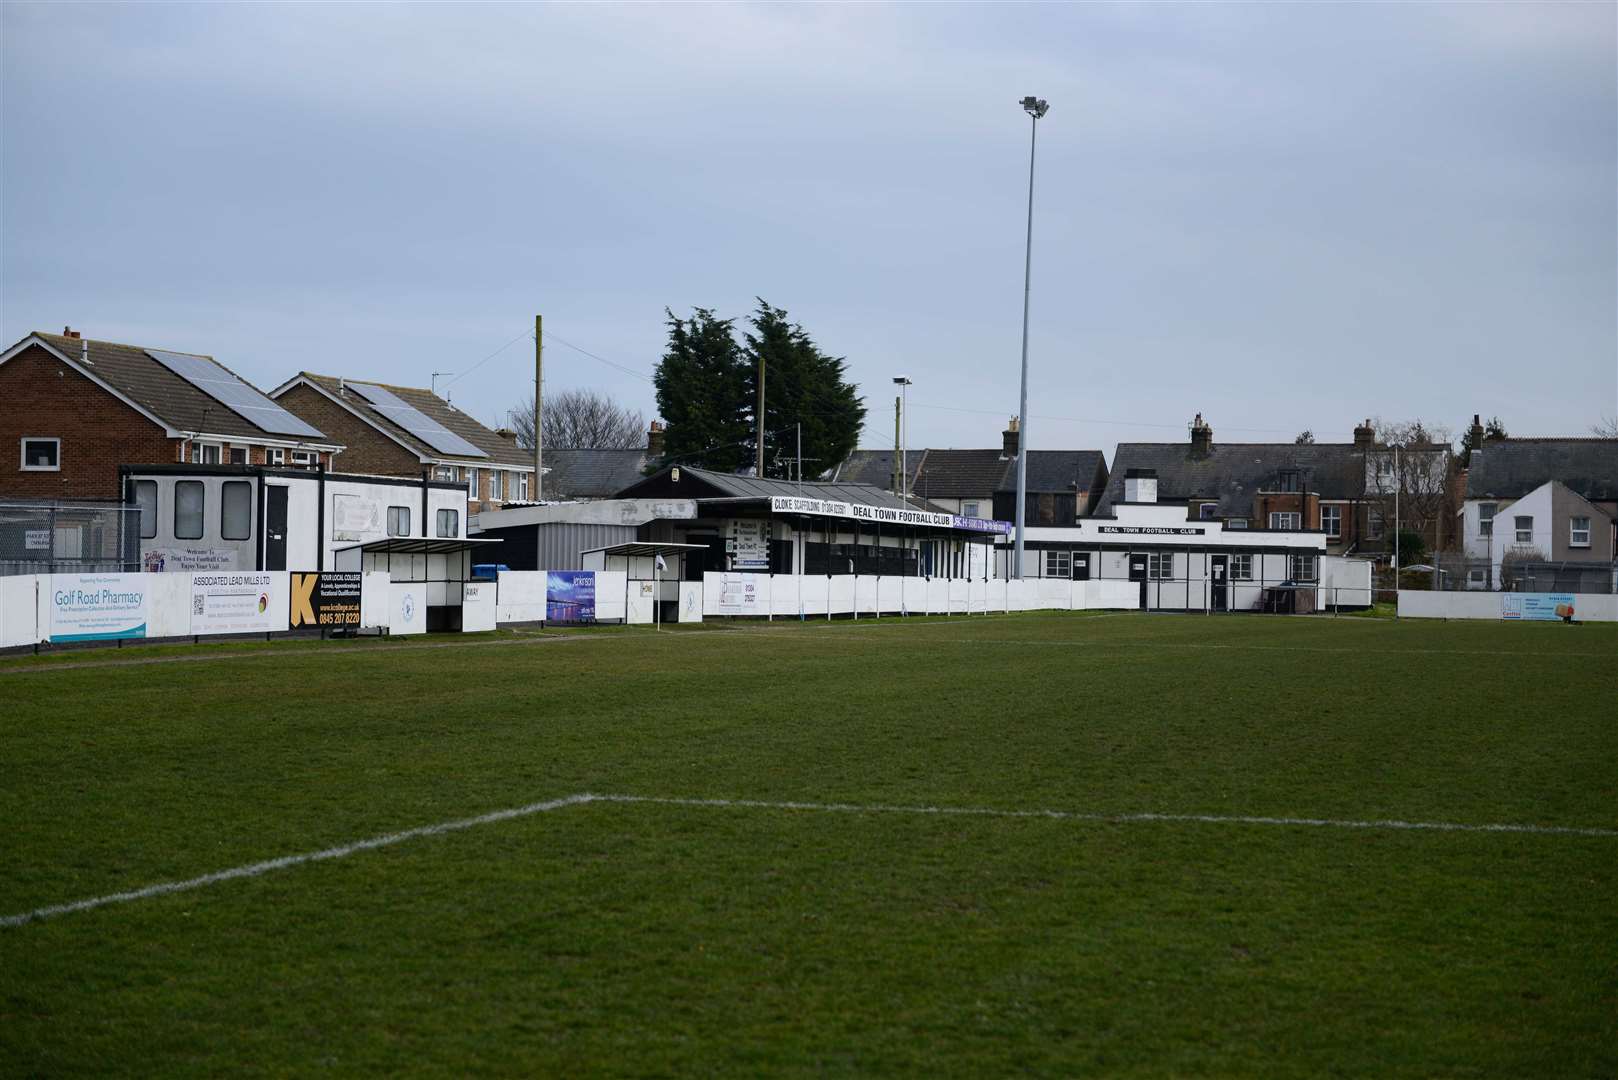 Deal Town Football Club: The Charles Ground